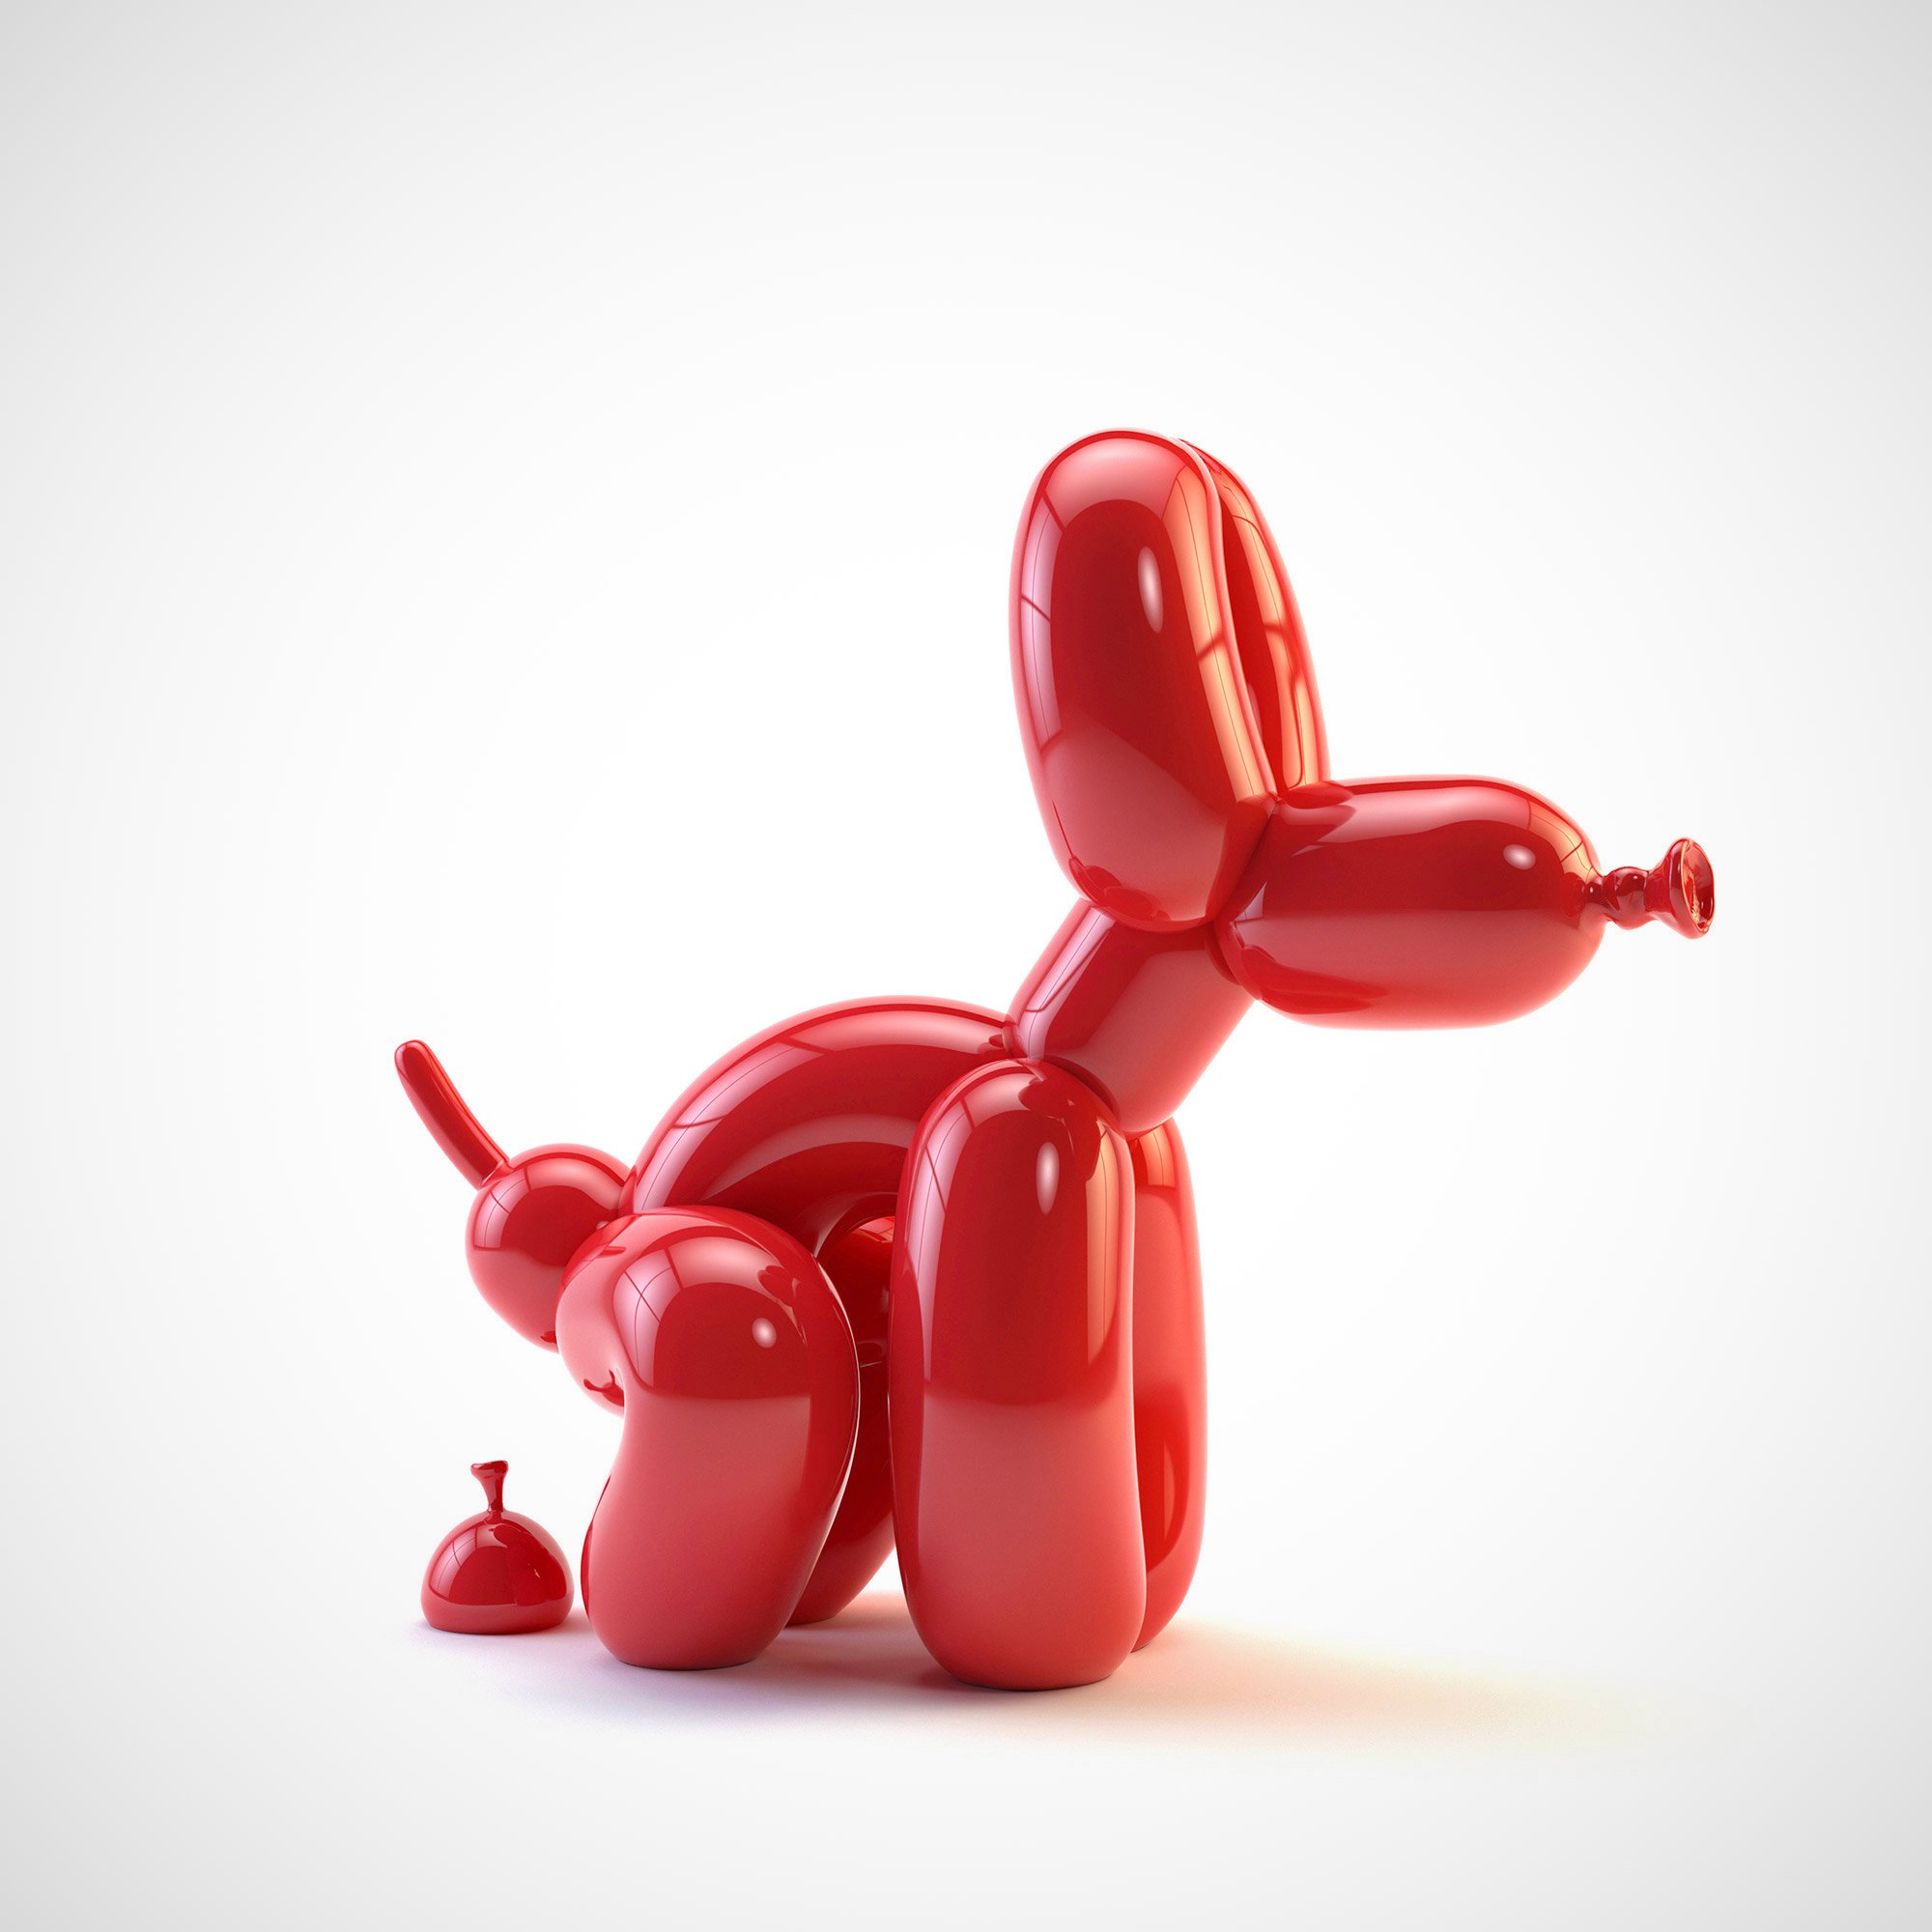  » Metal sculpture outdoor decor Jeff koons and his balloon dogs Featured Image